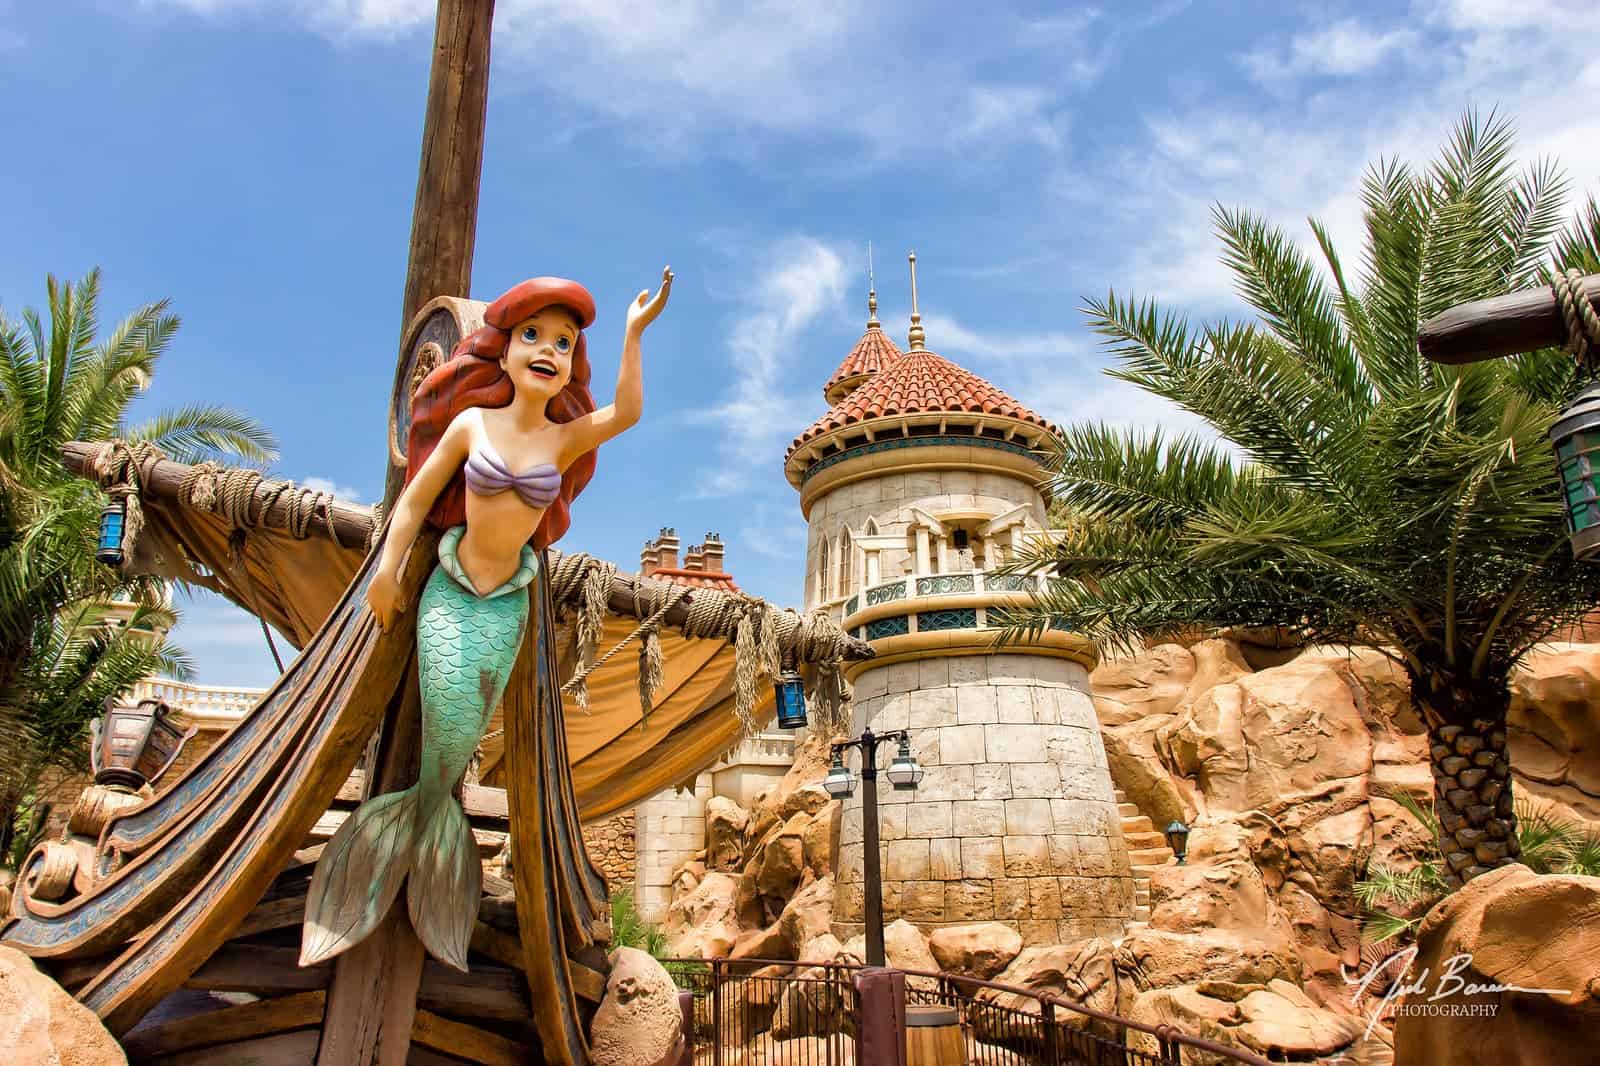 Under the Sea - Journey of The Little Mermaid